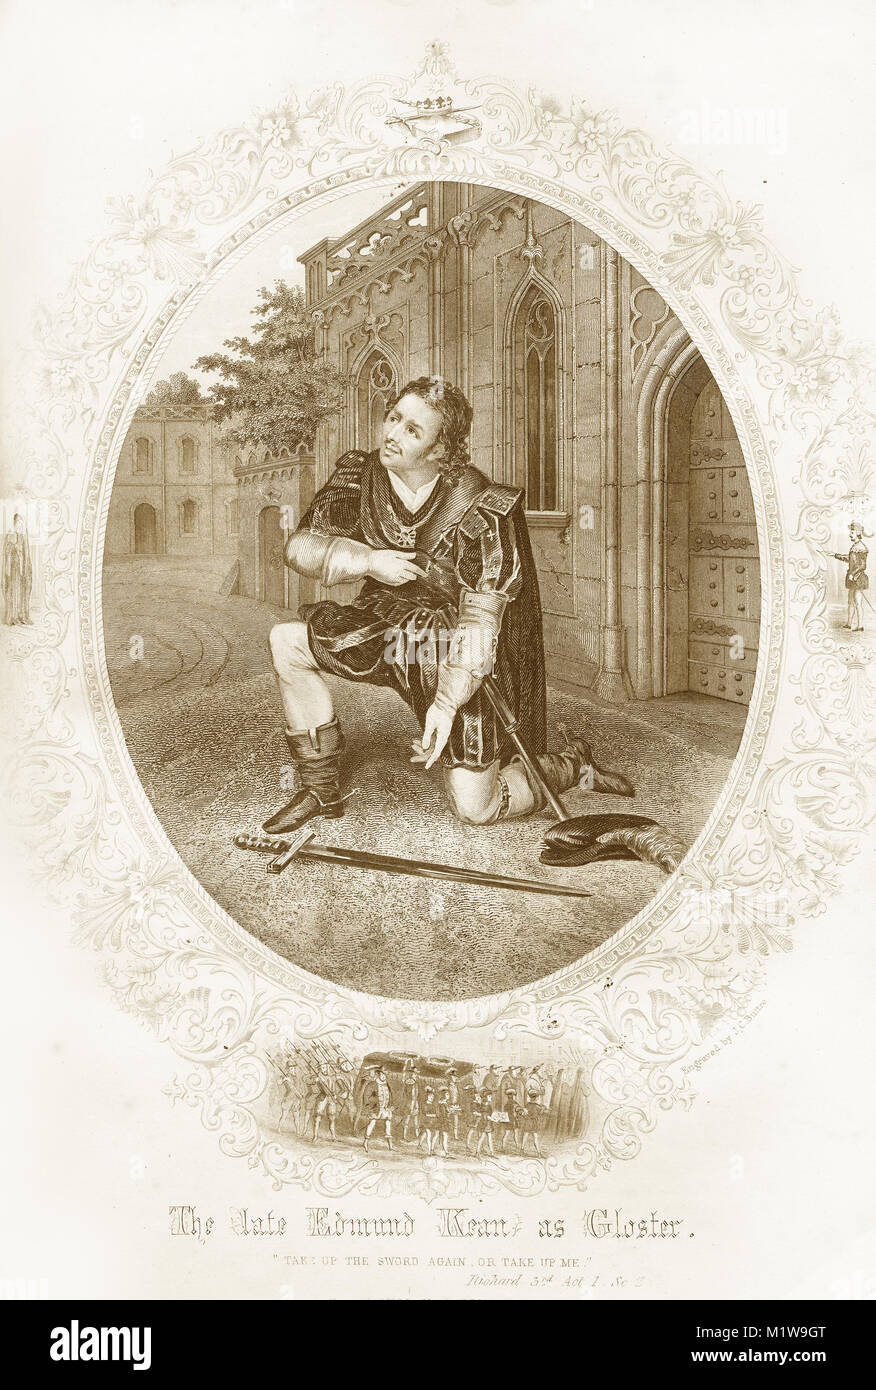 Engraving of the Shakespearean character Gloster, acted by an American, Edmund Kean in Richard III. From the Illustrated Complete Works of Shakespeare, 1878 Stock Photo